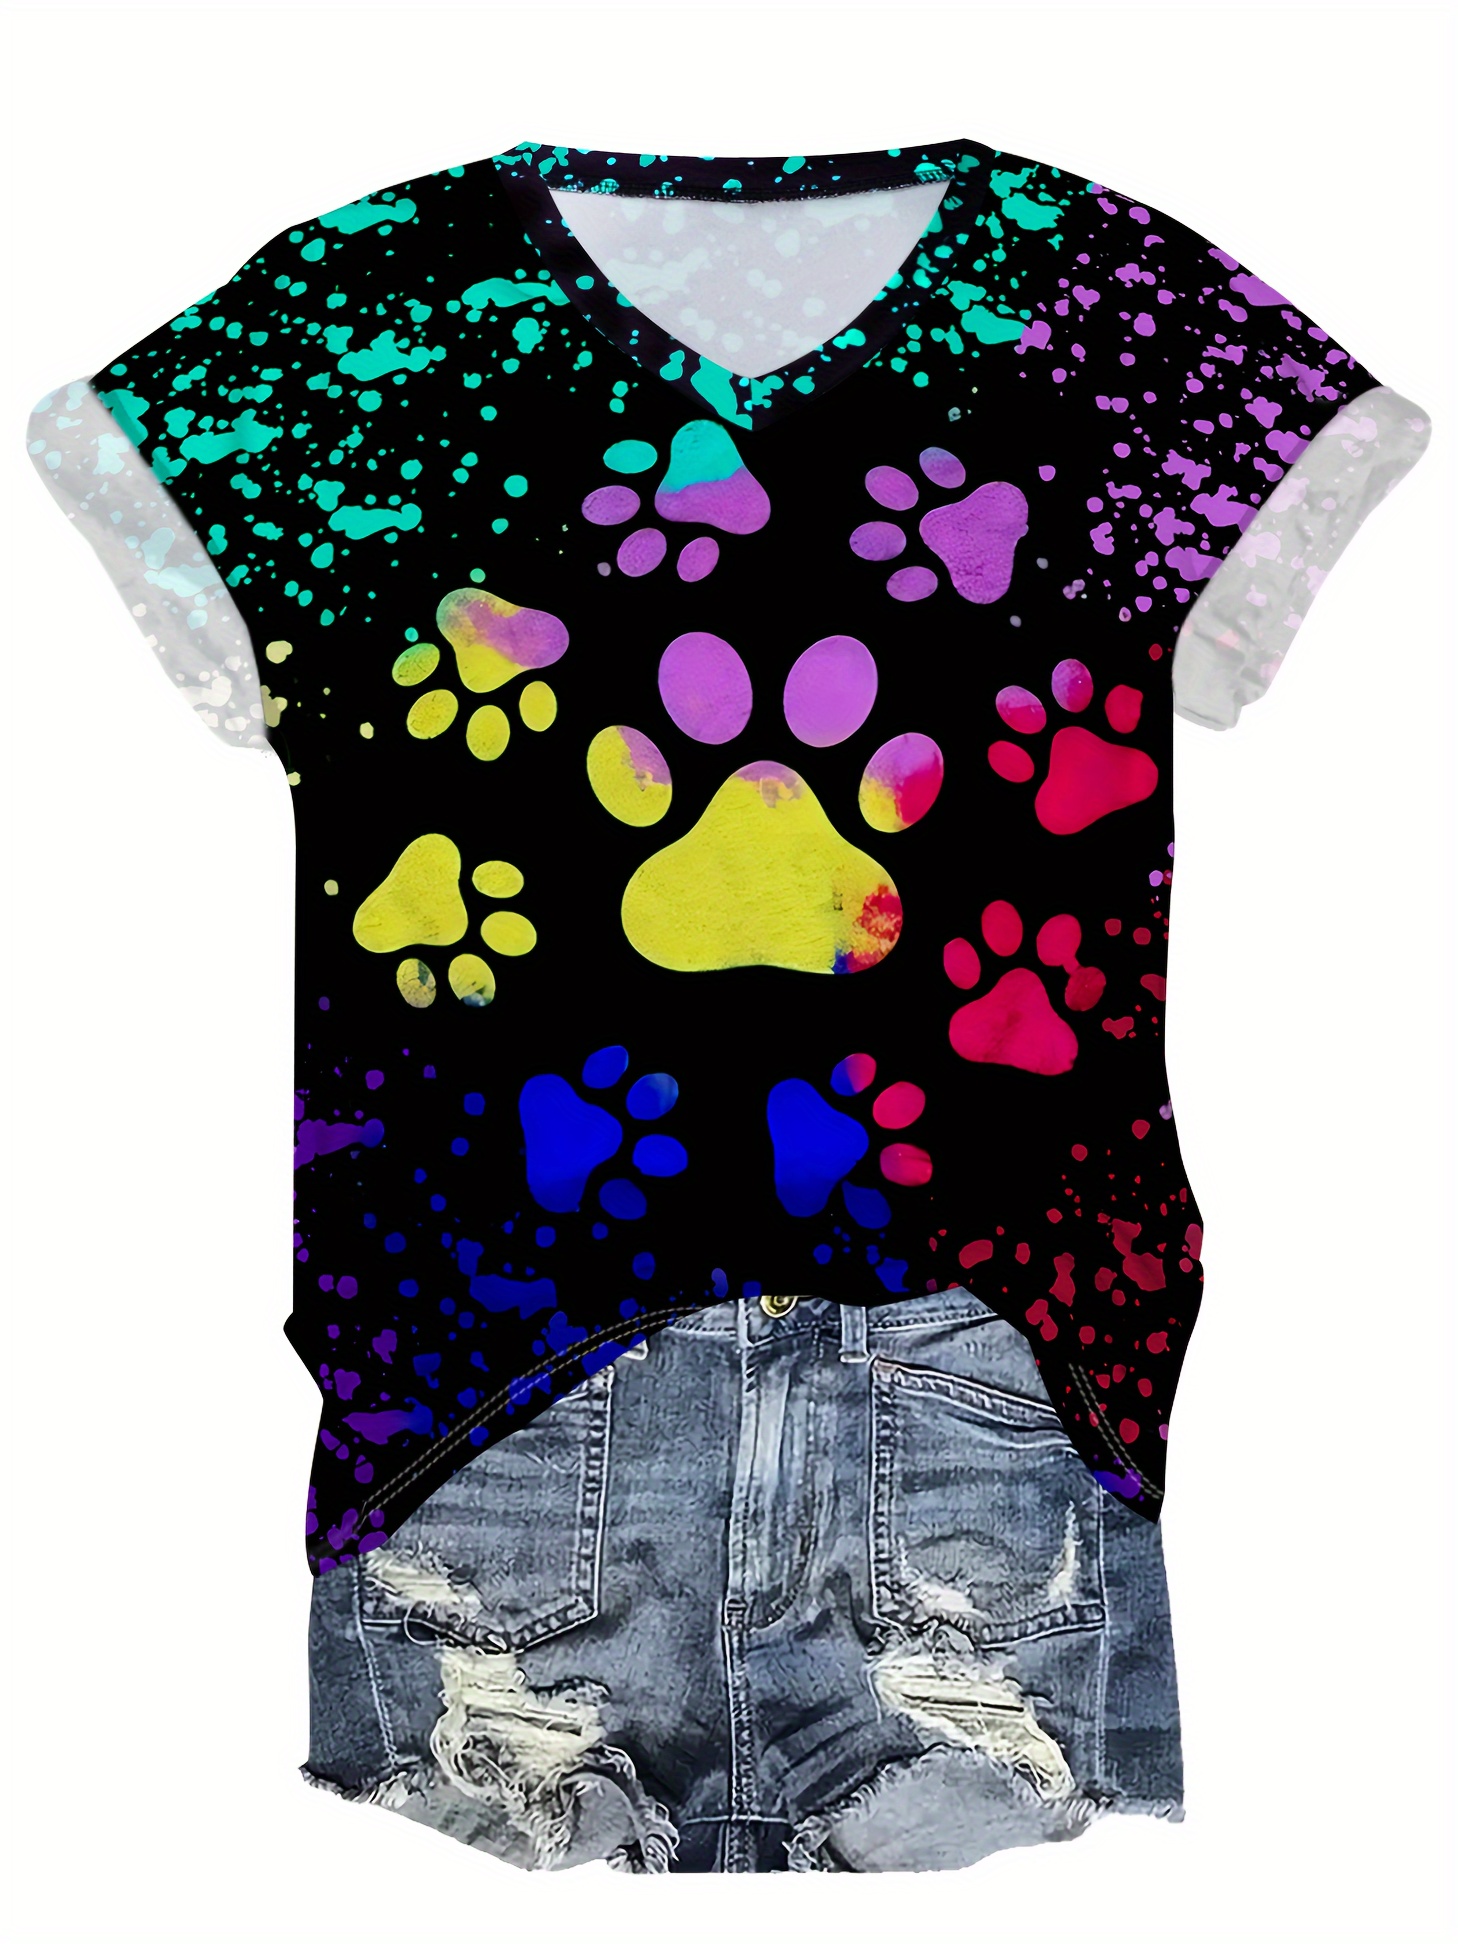 Fashion Pet Clothes Butterfly Flower Print Tank Top Summer Small